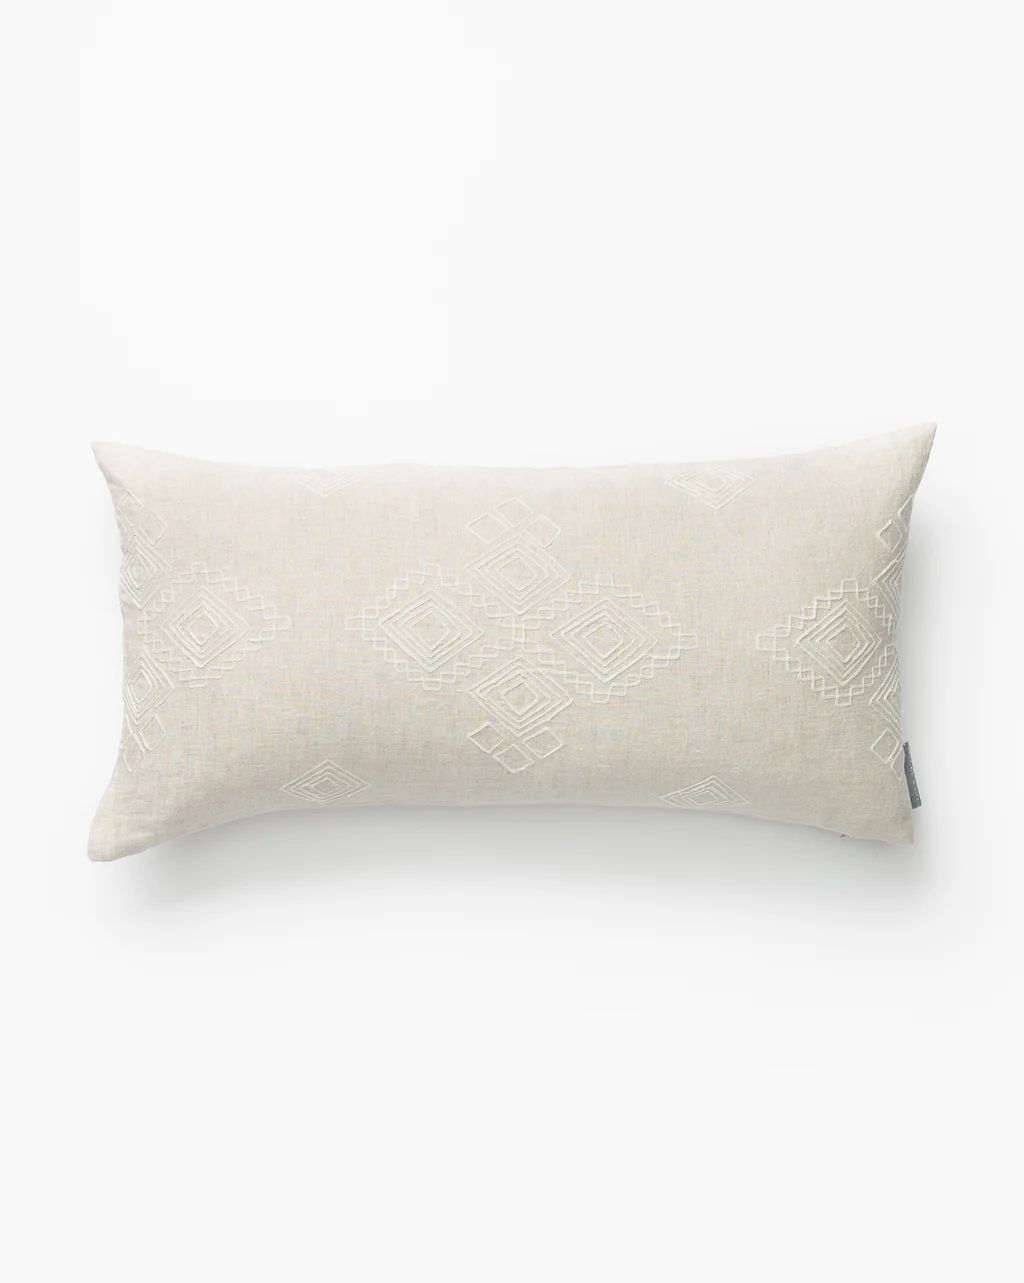 Jamille Woven Pillow Cover | McGee & Co.